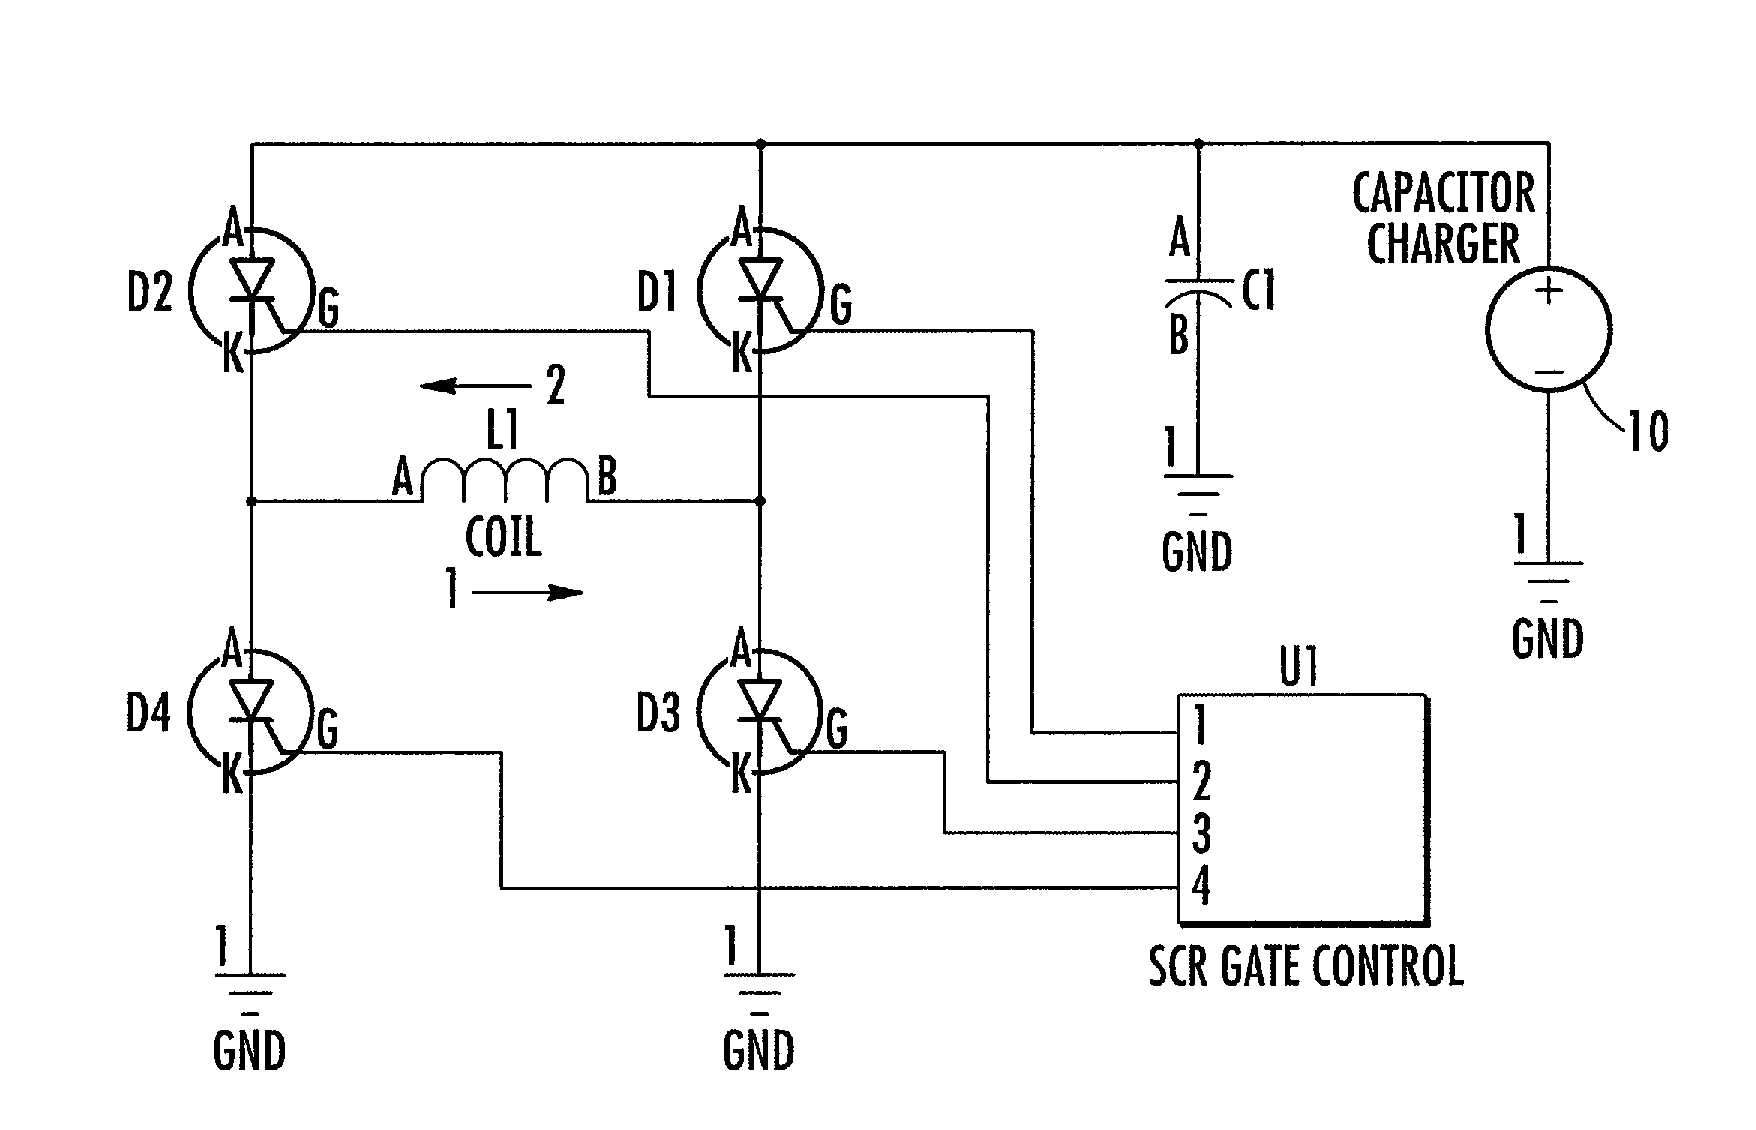 Capacitor based bi-directional degaussing device with chamber